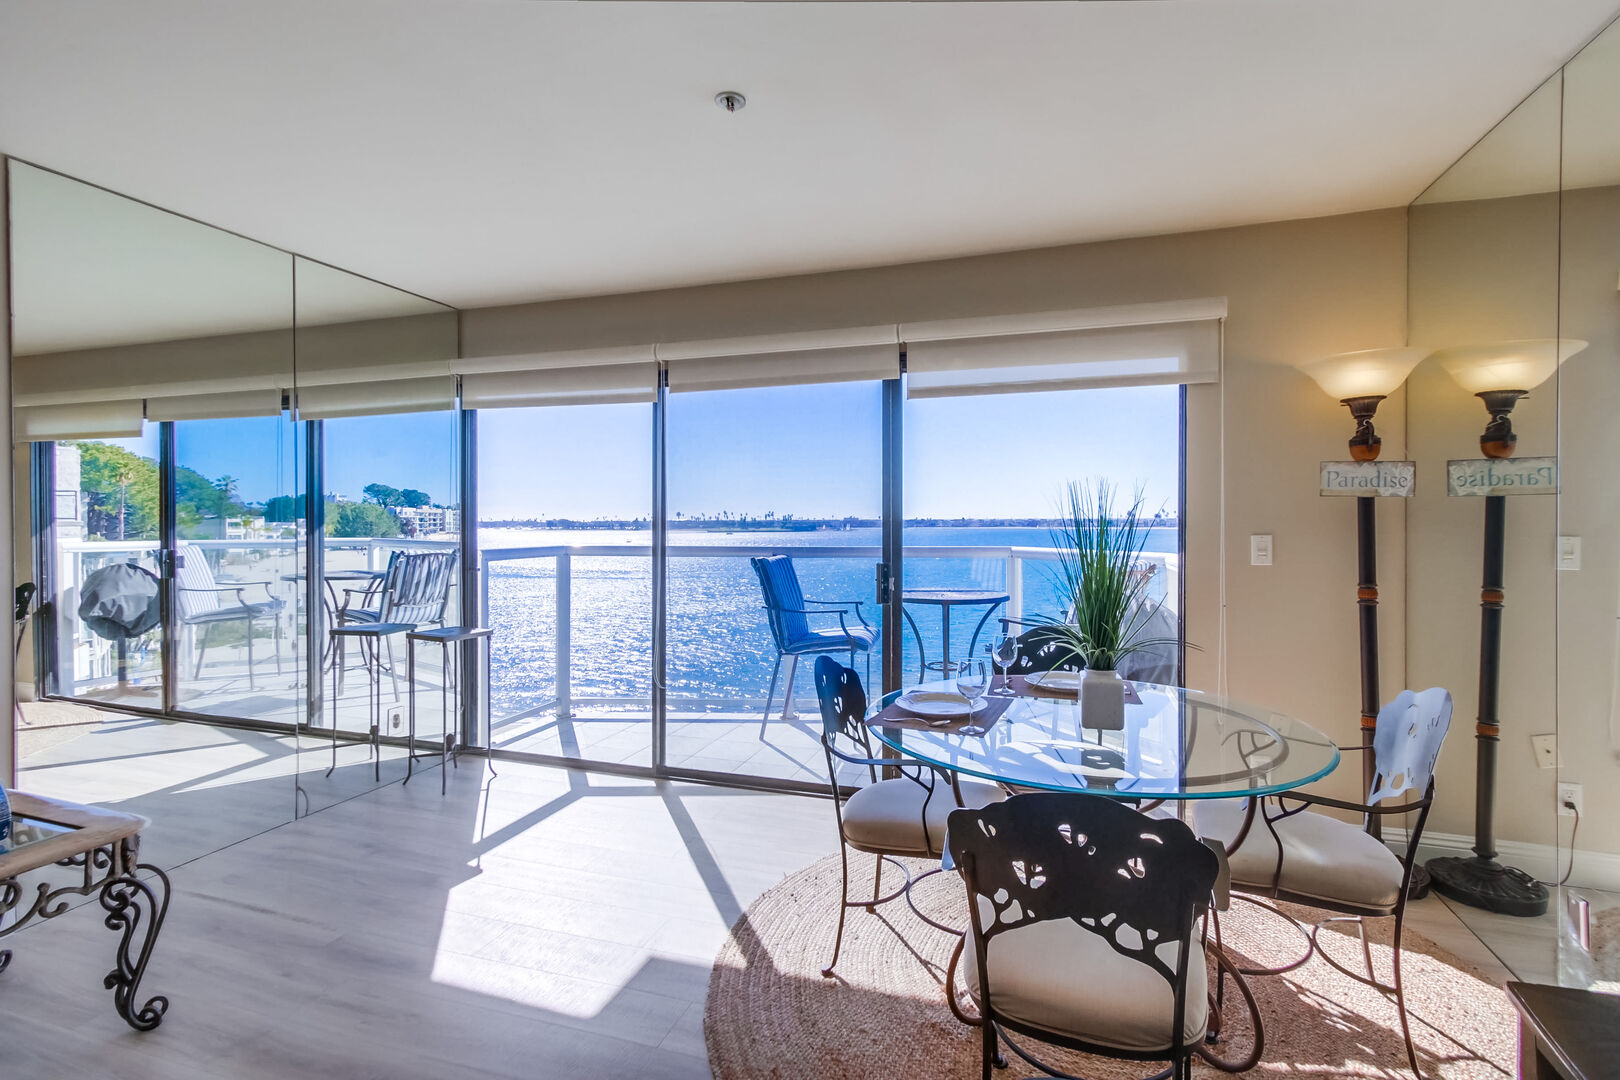 Large sliding glass doors open to a private balcony with breathtaking view